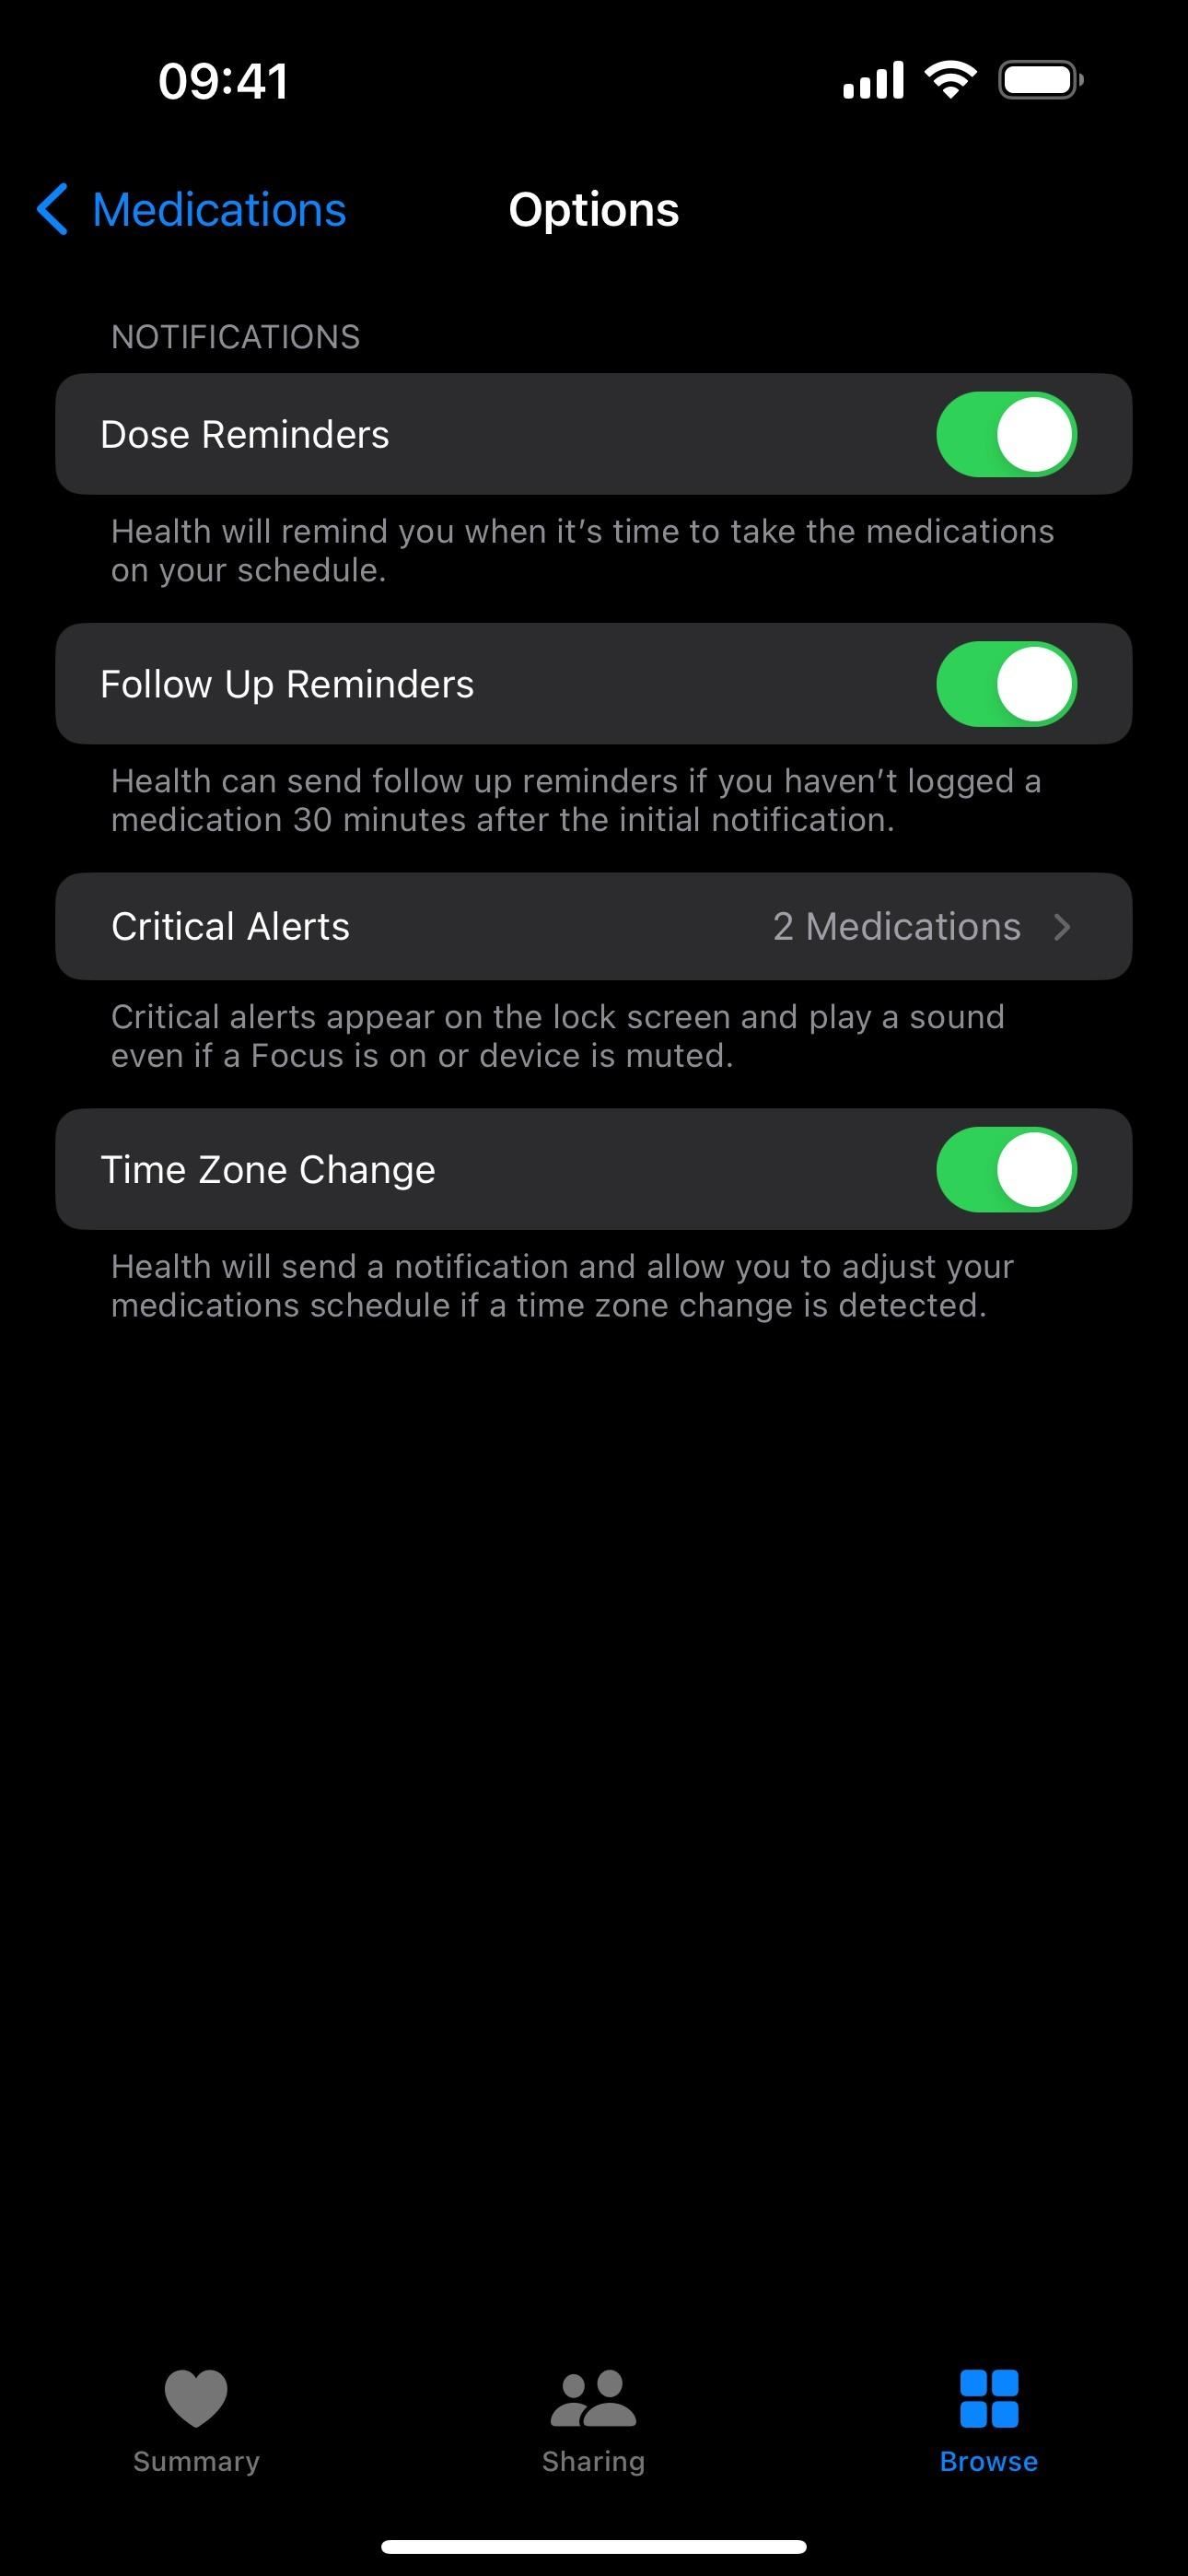 16 New Health and Fitness Features on Your iPhone That Can Help Improve Your Life